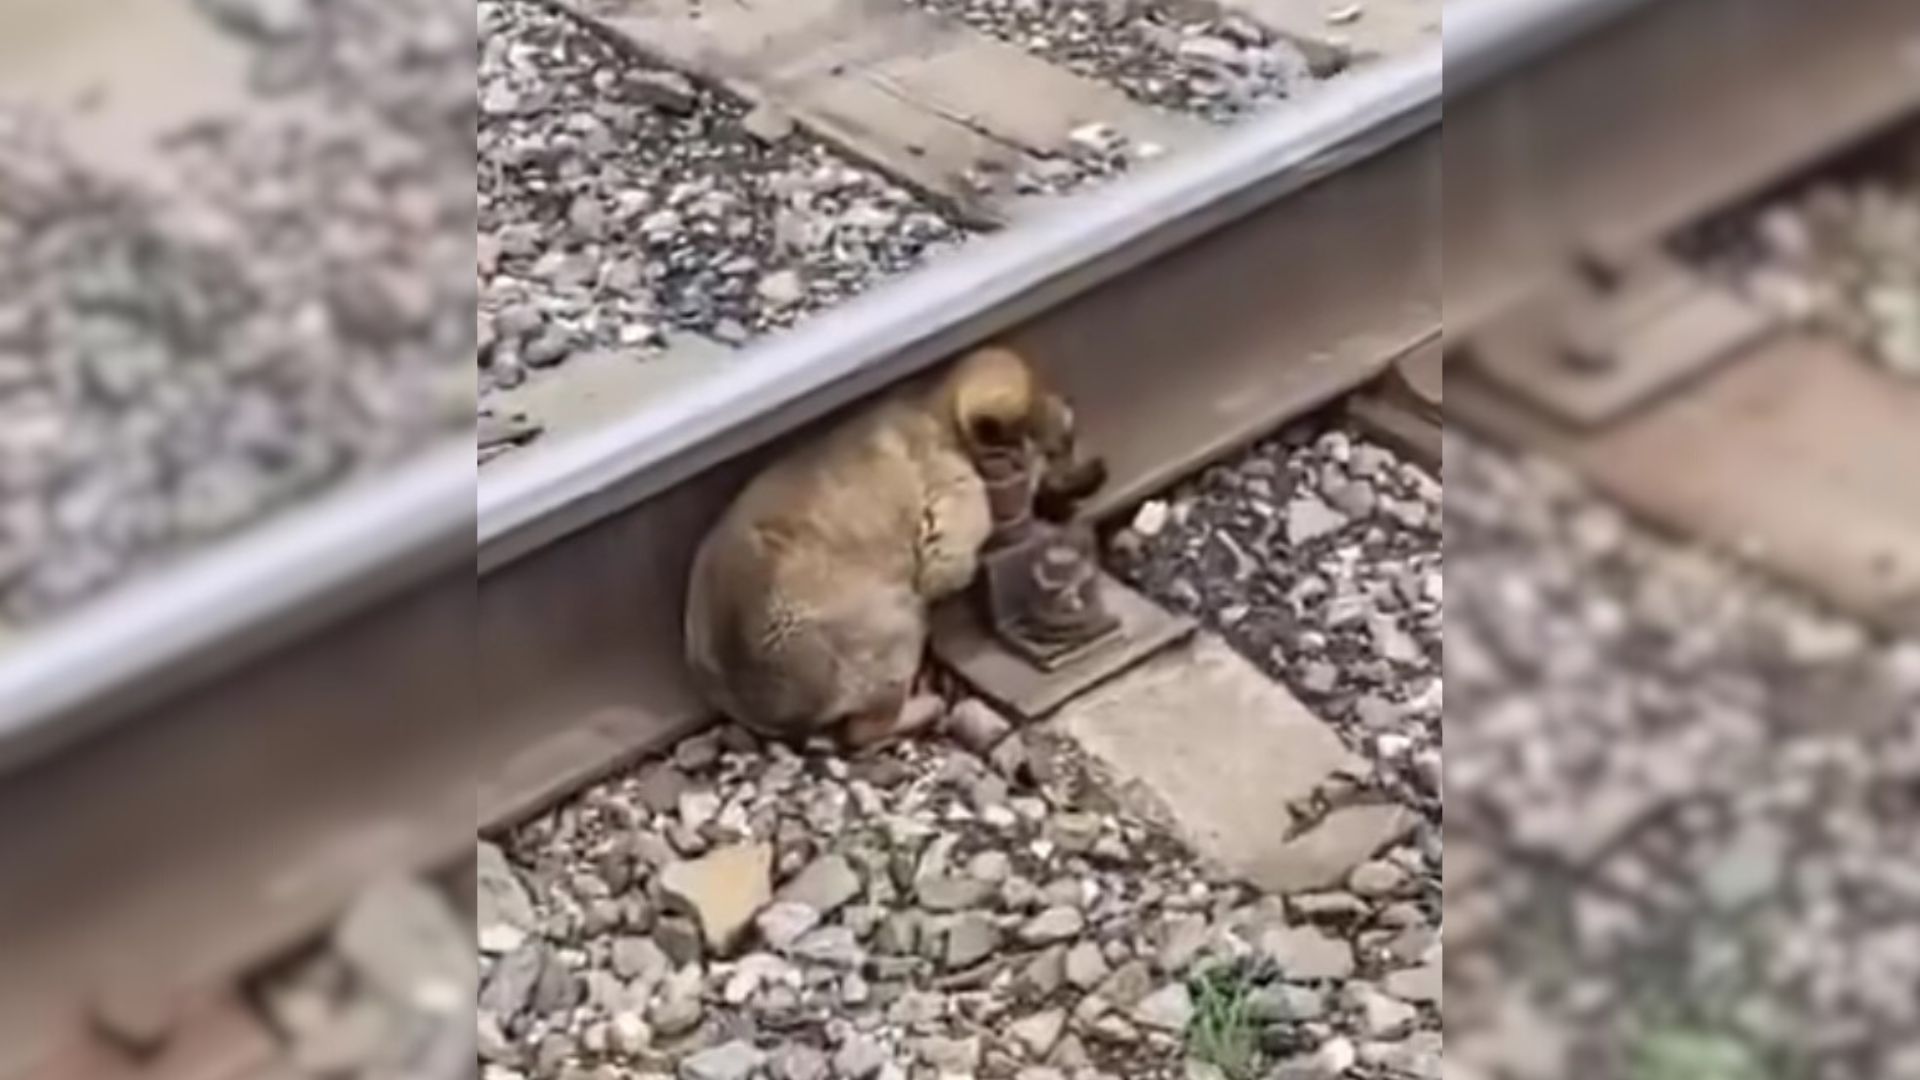 Rescuers Who Saved A Three-Week-Old Puppy From A Dangerous Railway Decided To Not Stop There